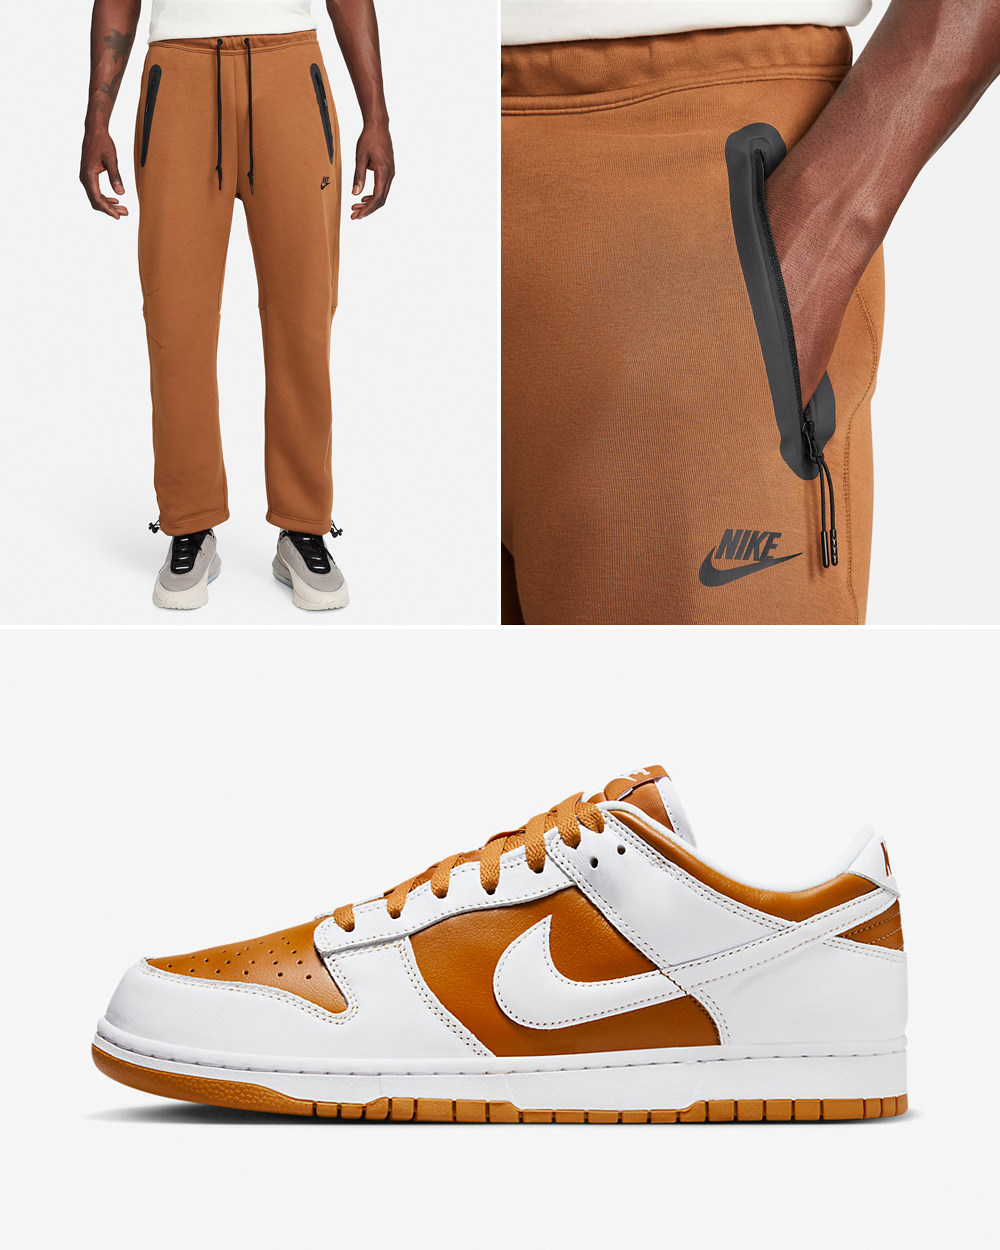 Nike-Dunk-Low-Reverse-Curry-Pants-Matching-Outfit